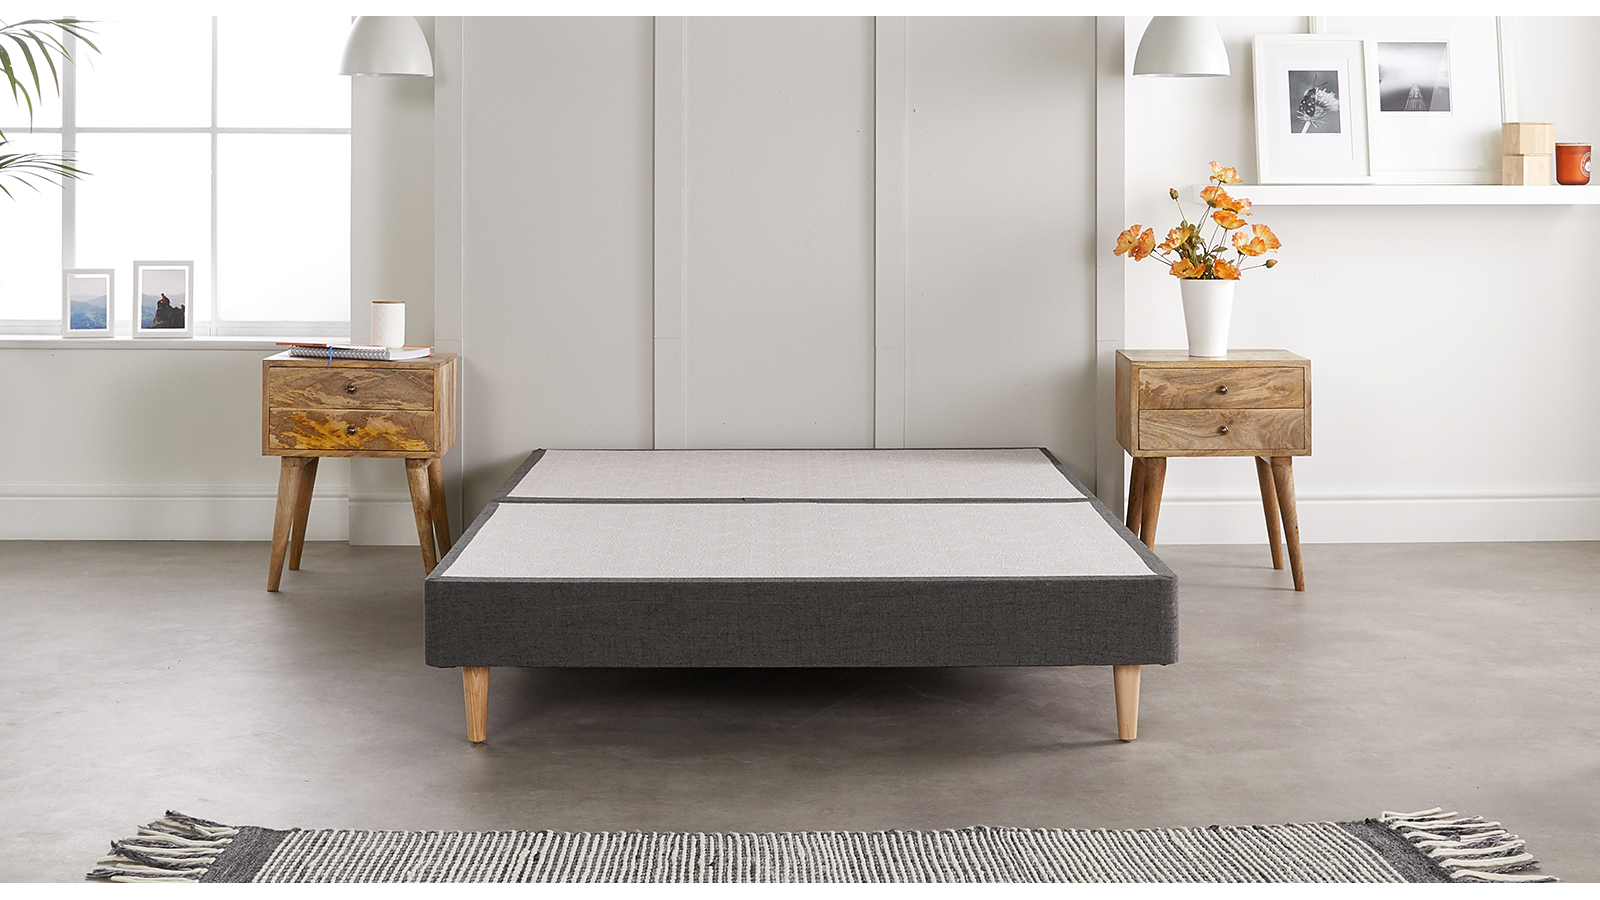 Do you love minimalist design and don’t want to compromise on quality? Discover our Vincent bed frame, combining contemporary style and a premium upholstery fabrics that mimics the look and feel of natural wool.